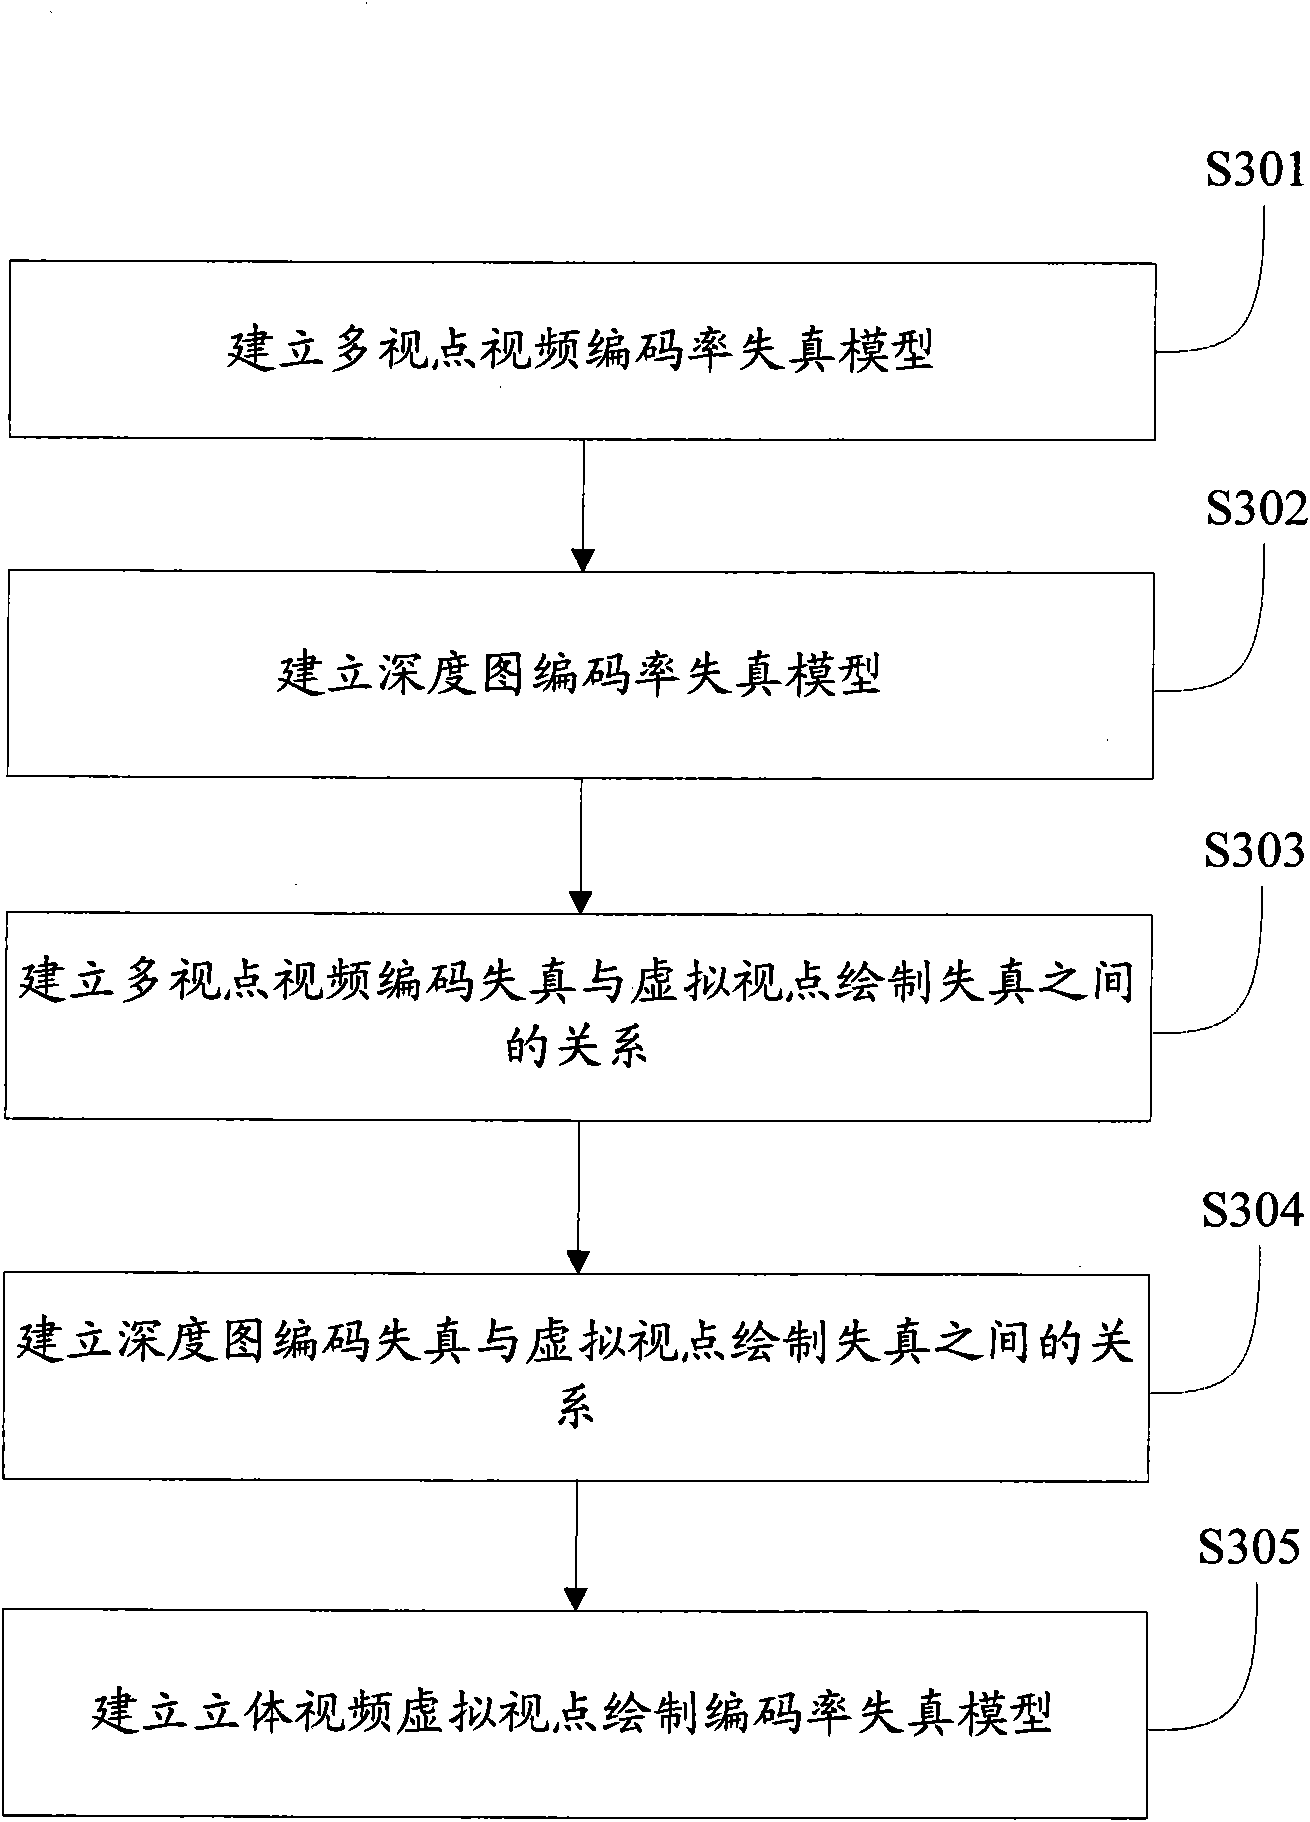 Estimation method of distortion performance of stereo video encoding rate